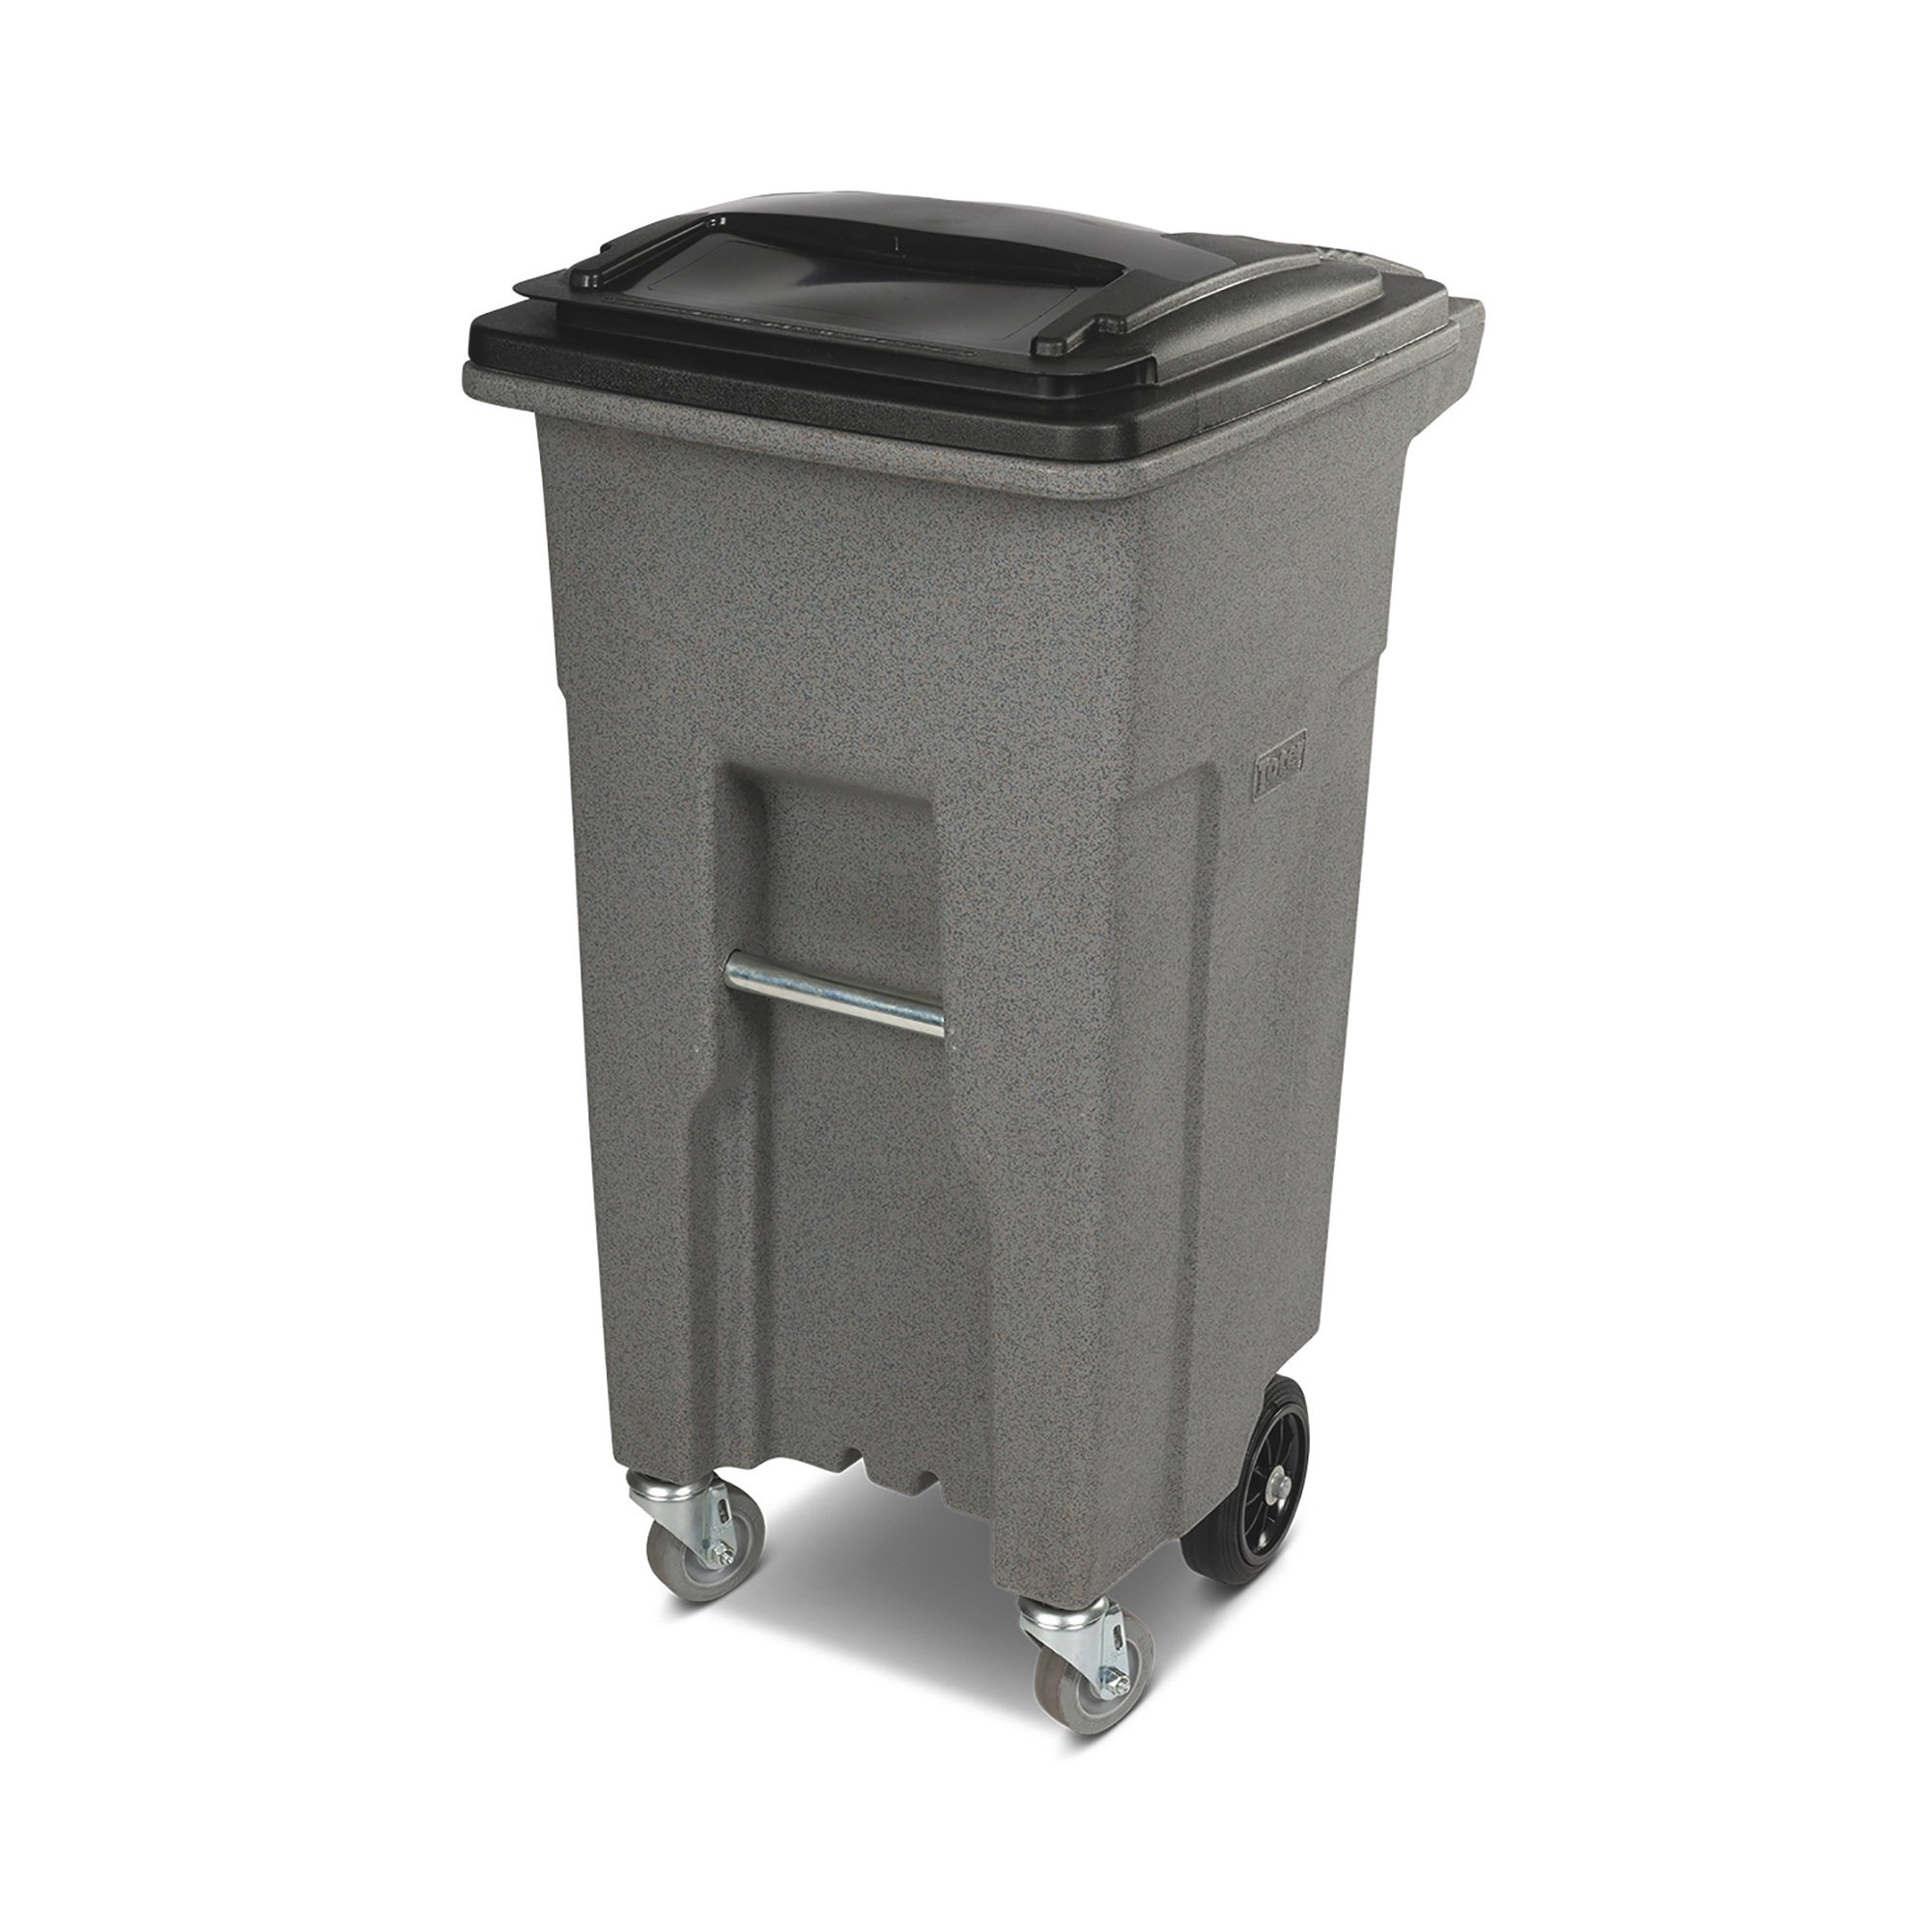 Toter 4-Wheel Trash Cart with Lid